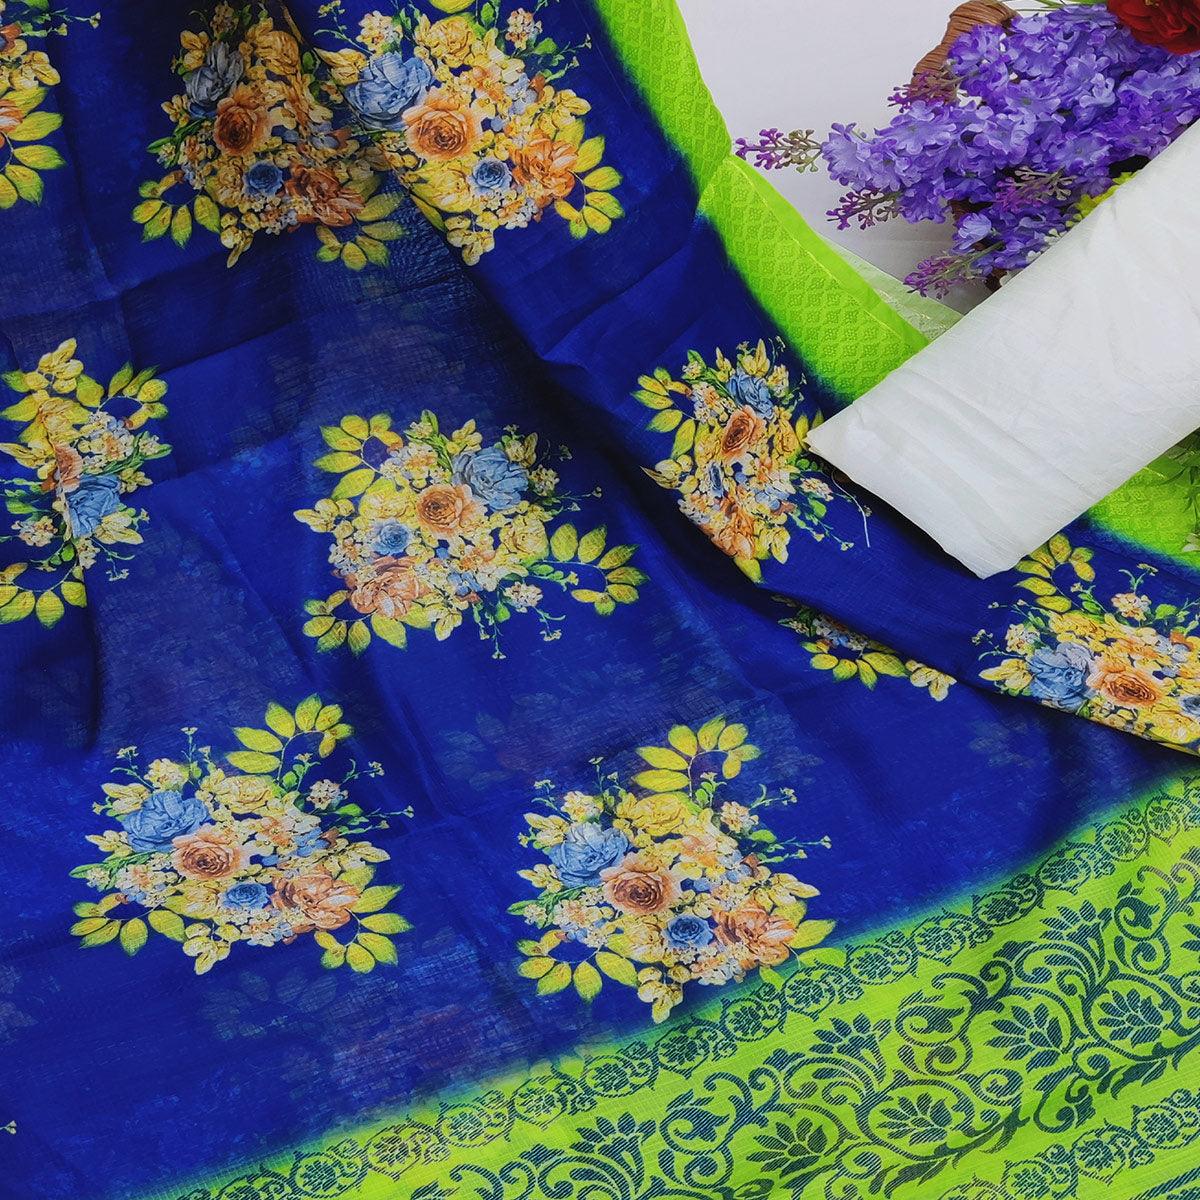 Royal Blue Festive Wear Floral Digital Printed With Woven Border Soft Cotton Saree - Peachmode